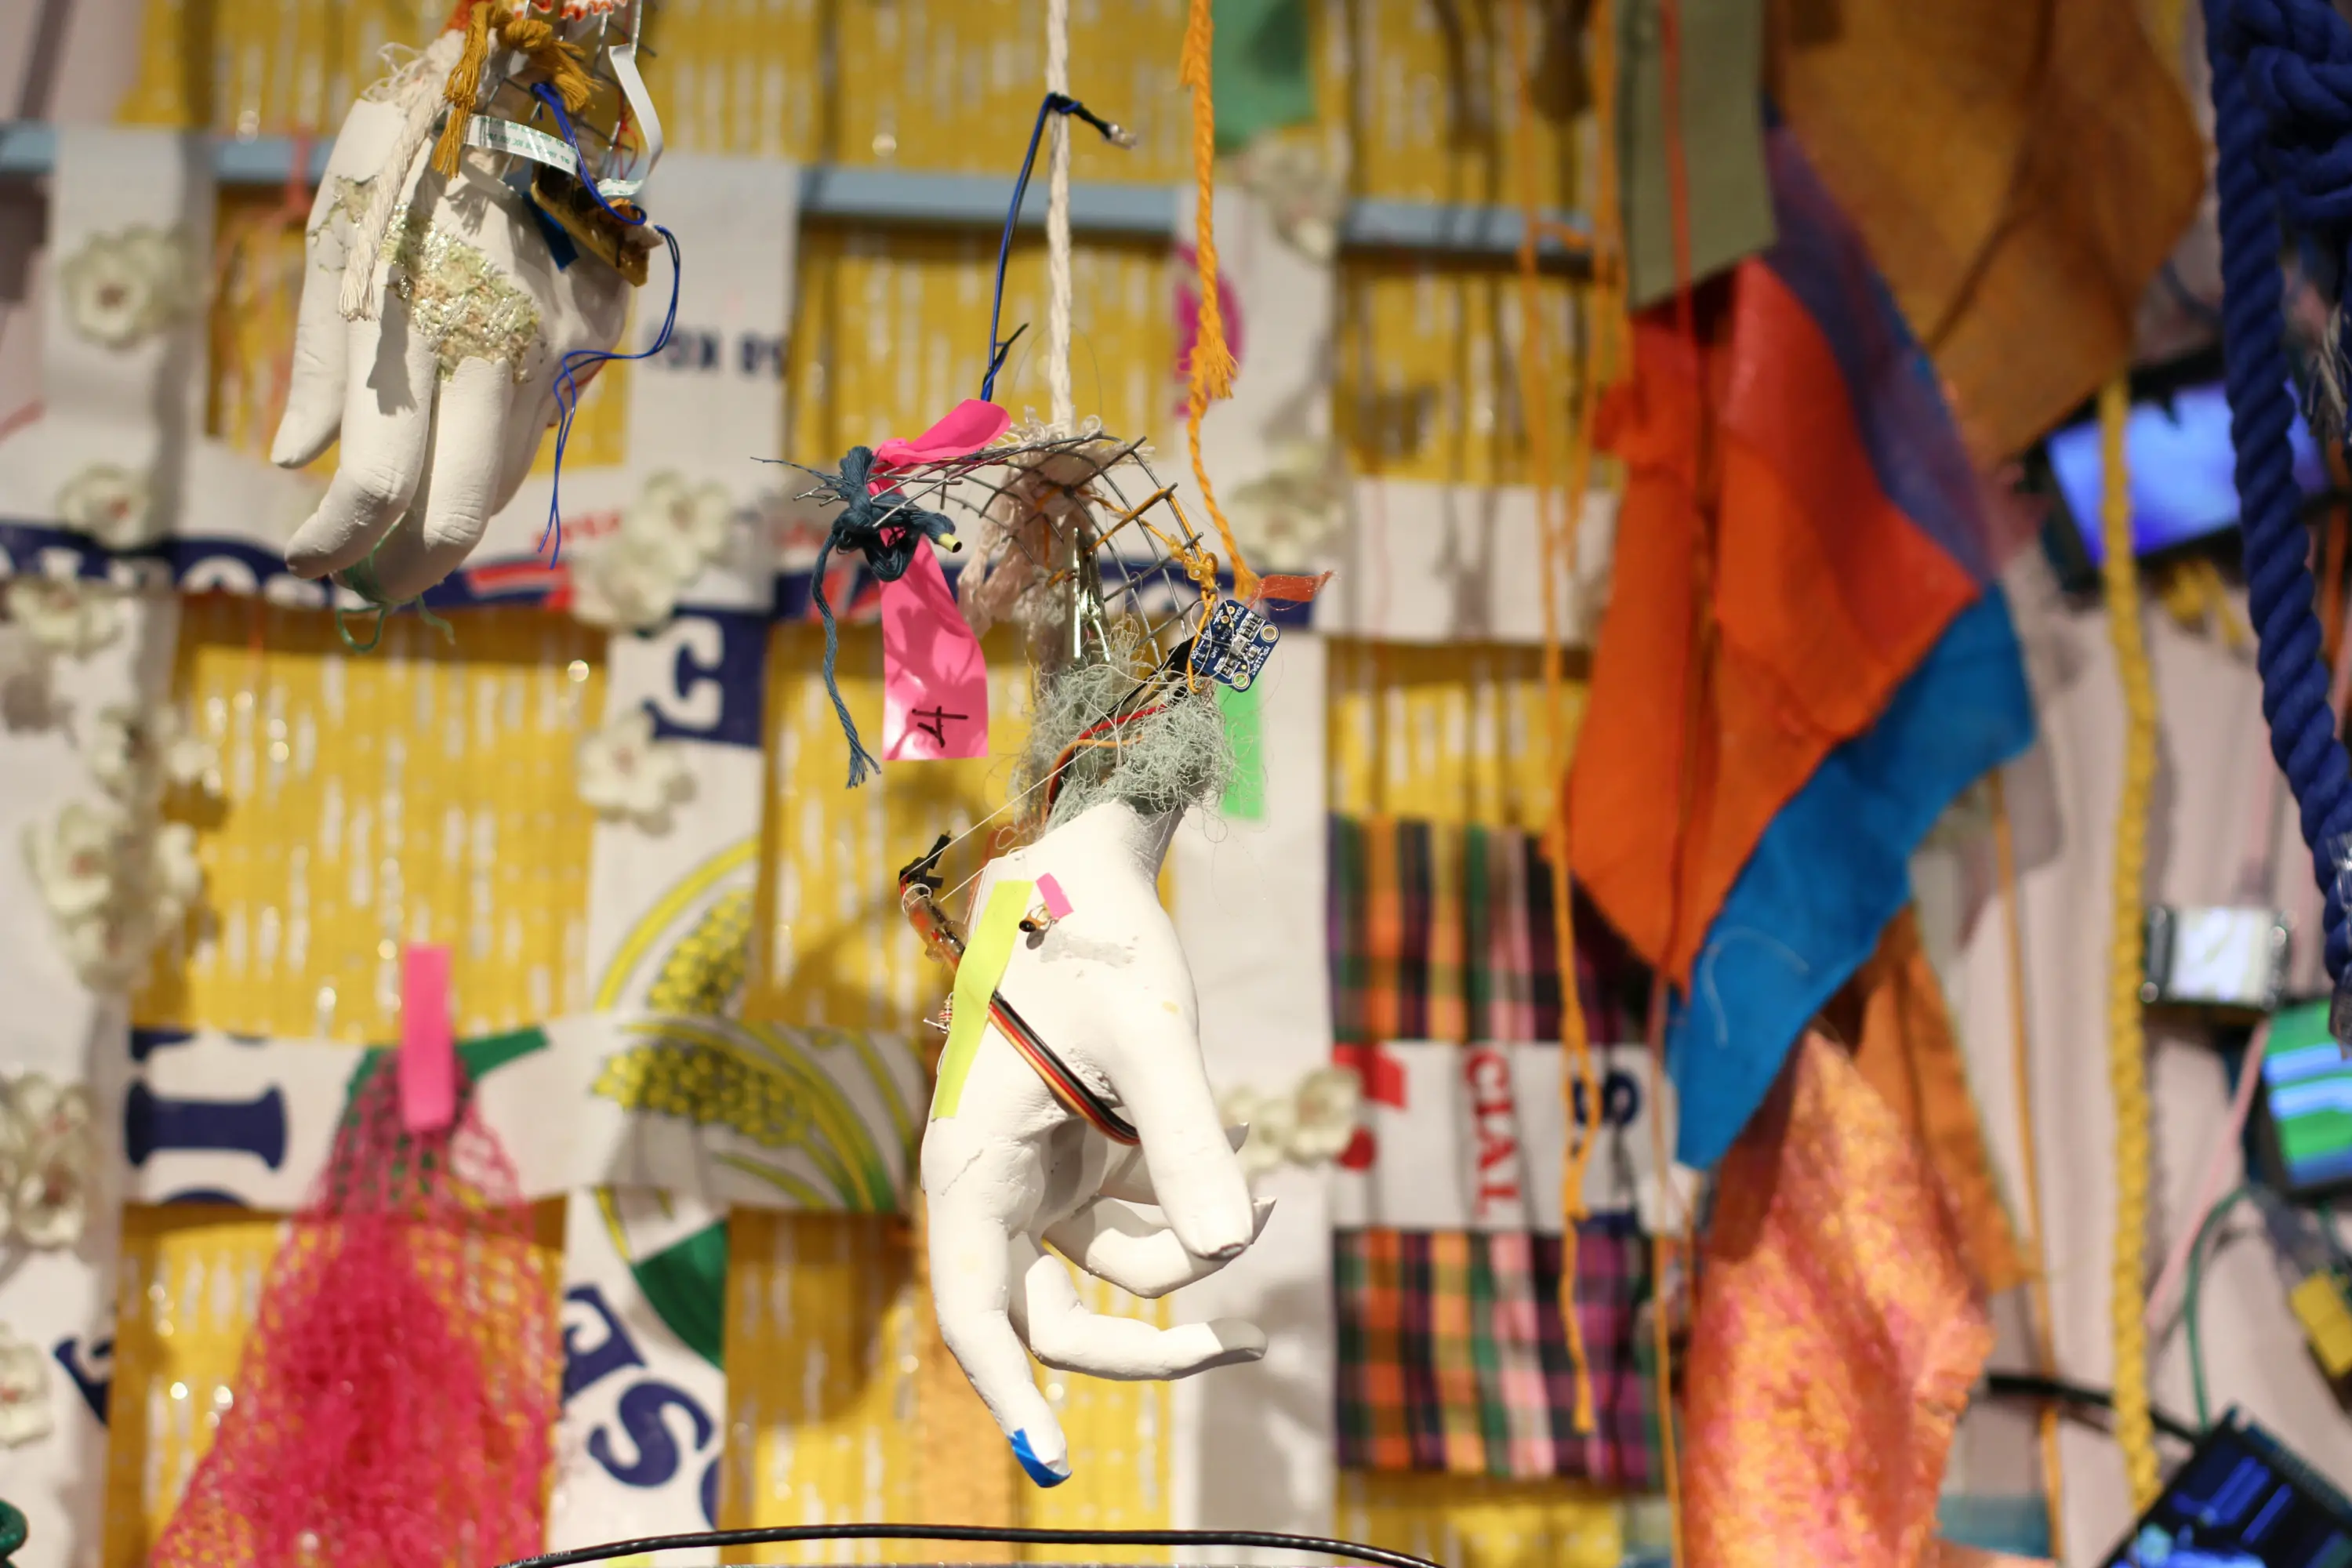 A white plaster hand hangs by two strands of yarn against a busy, colorful background. It is stuffed with various detritus, including wires, a computer chip, pink and yellow tape, and other strands of thin yarn. Another similar hand hangs slightly above it.